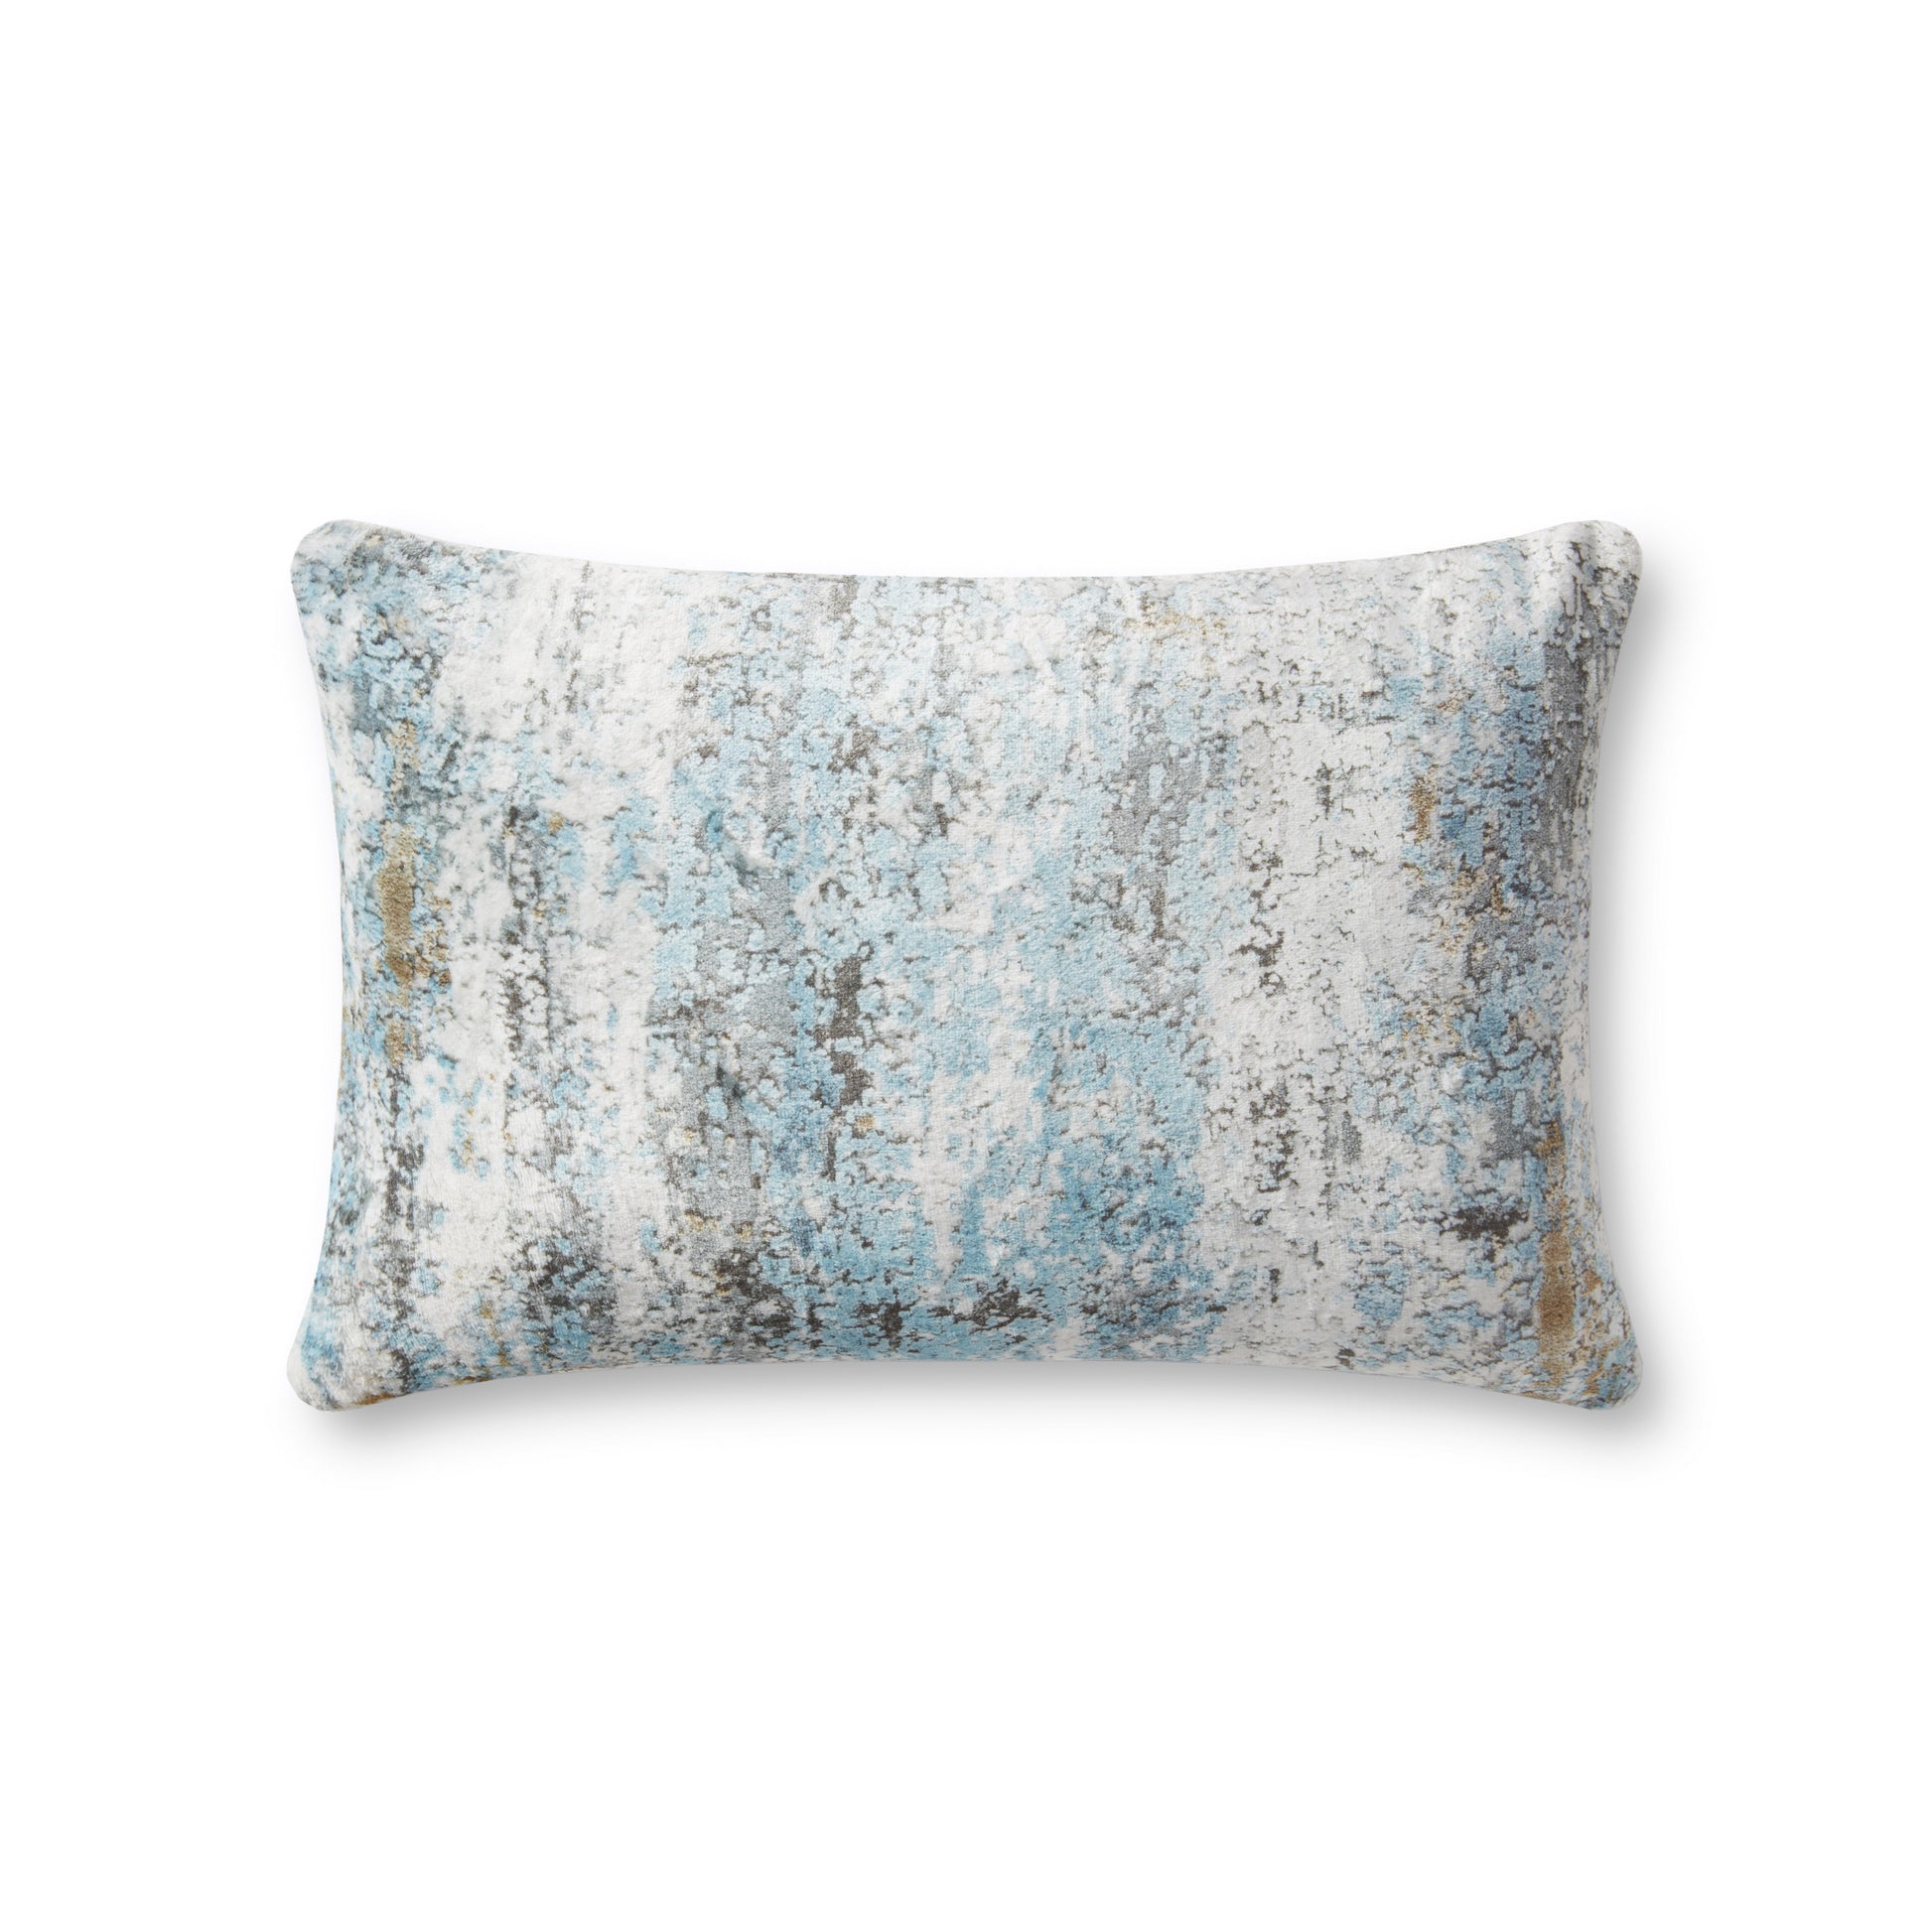 Photo of a pillow;  PLL0061 Grey / Multi 13" x 21" Cover Only Pillow